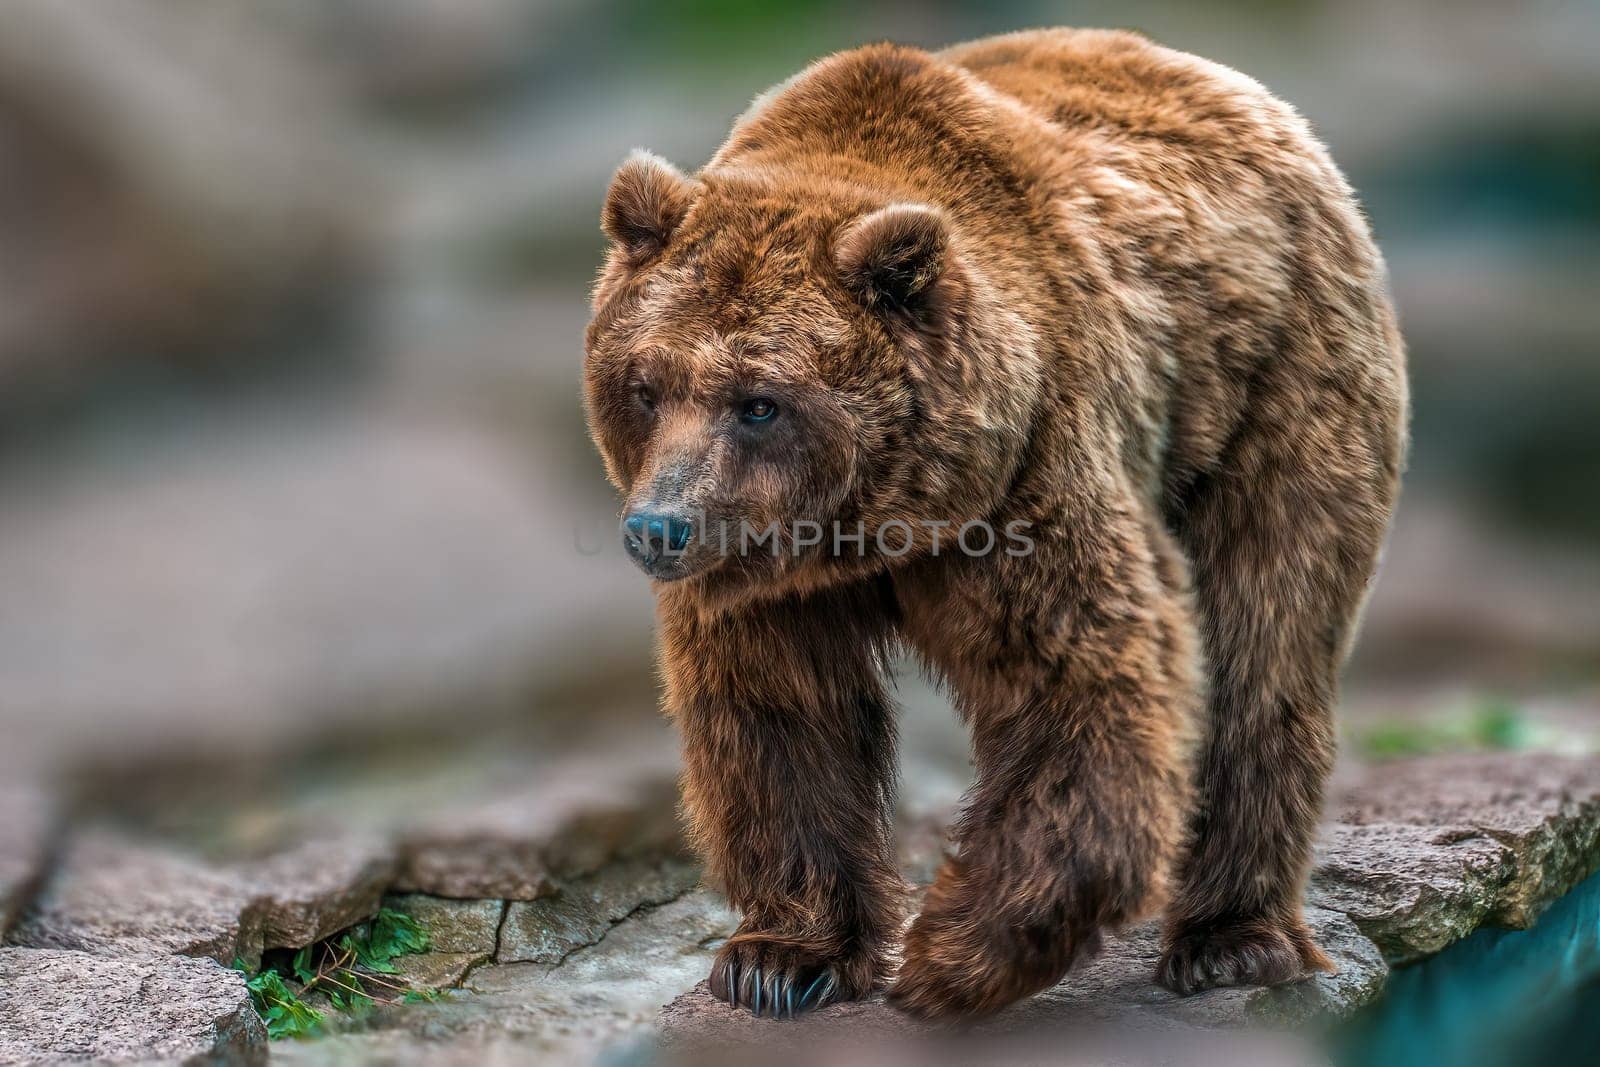 a big adult brown bear in a zoo